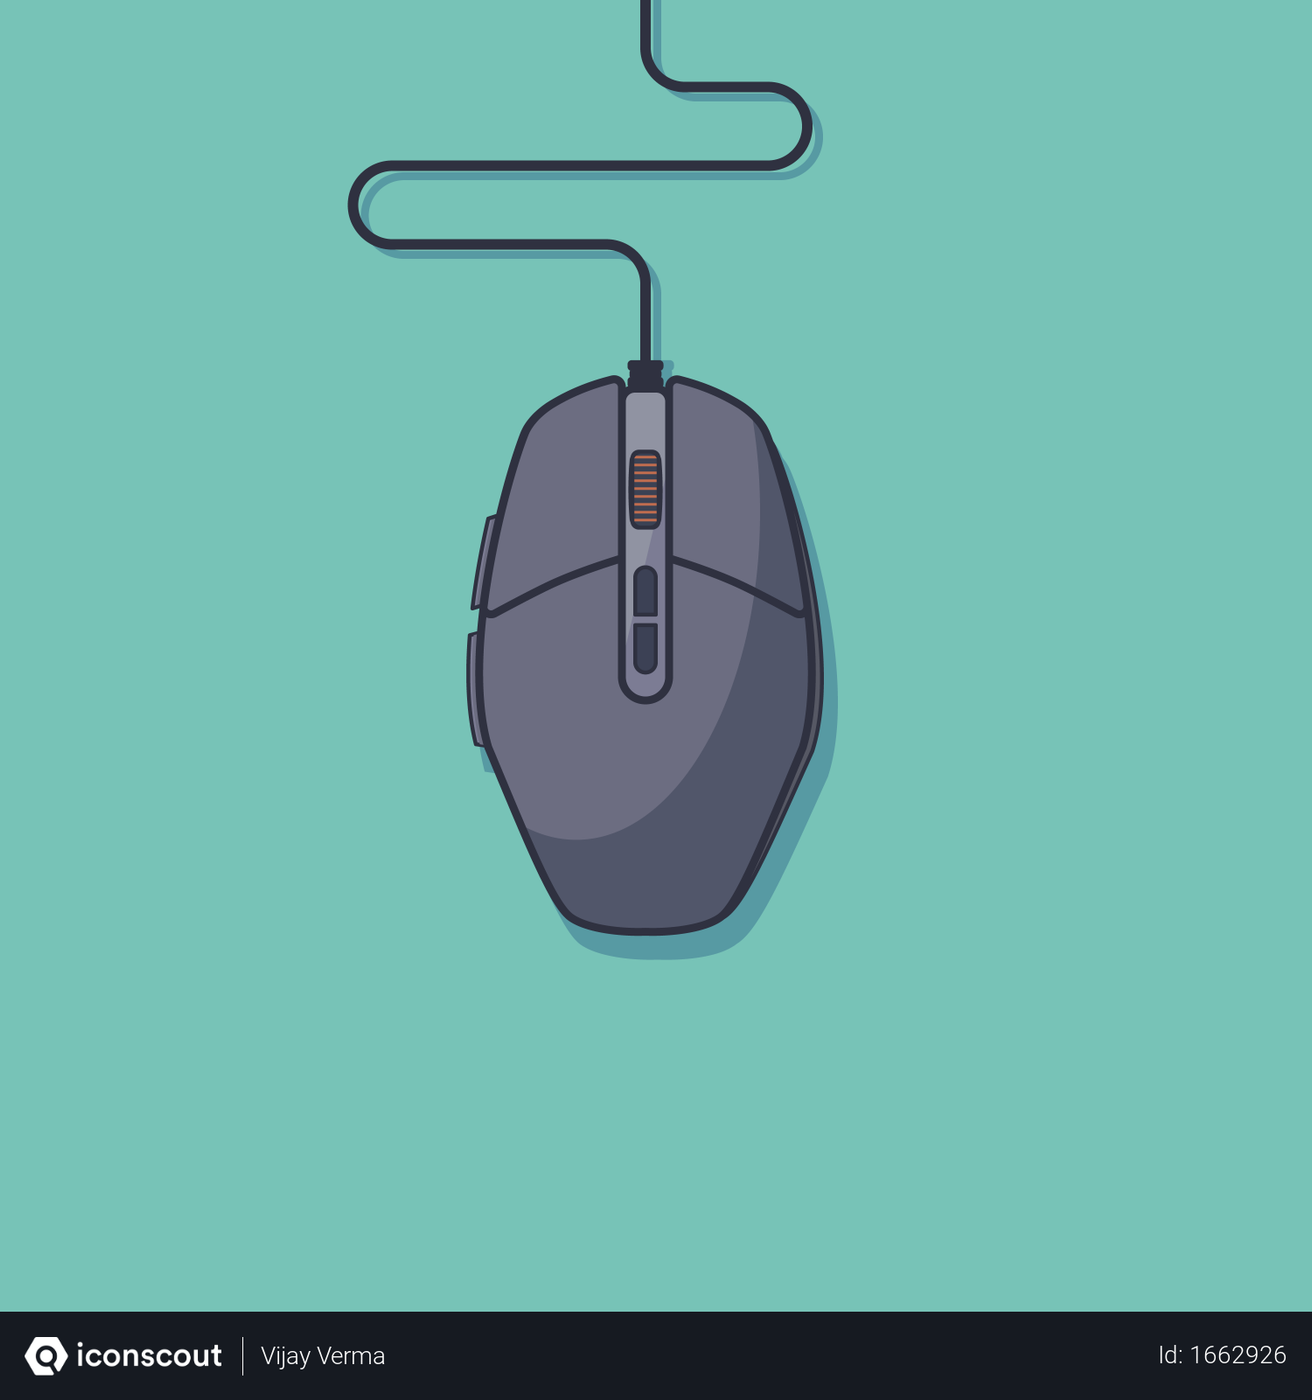 Free Gaming mouse Illustration download in PNG & Vector format